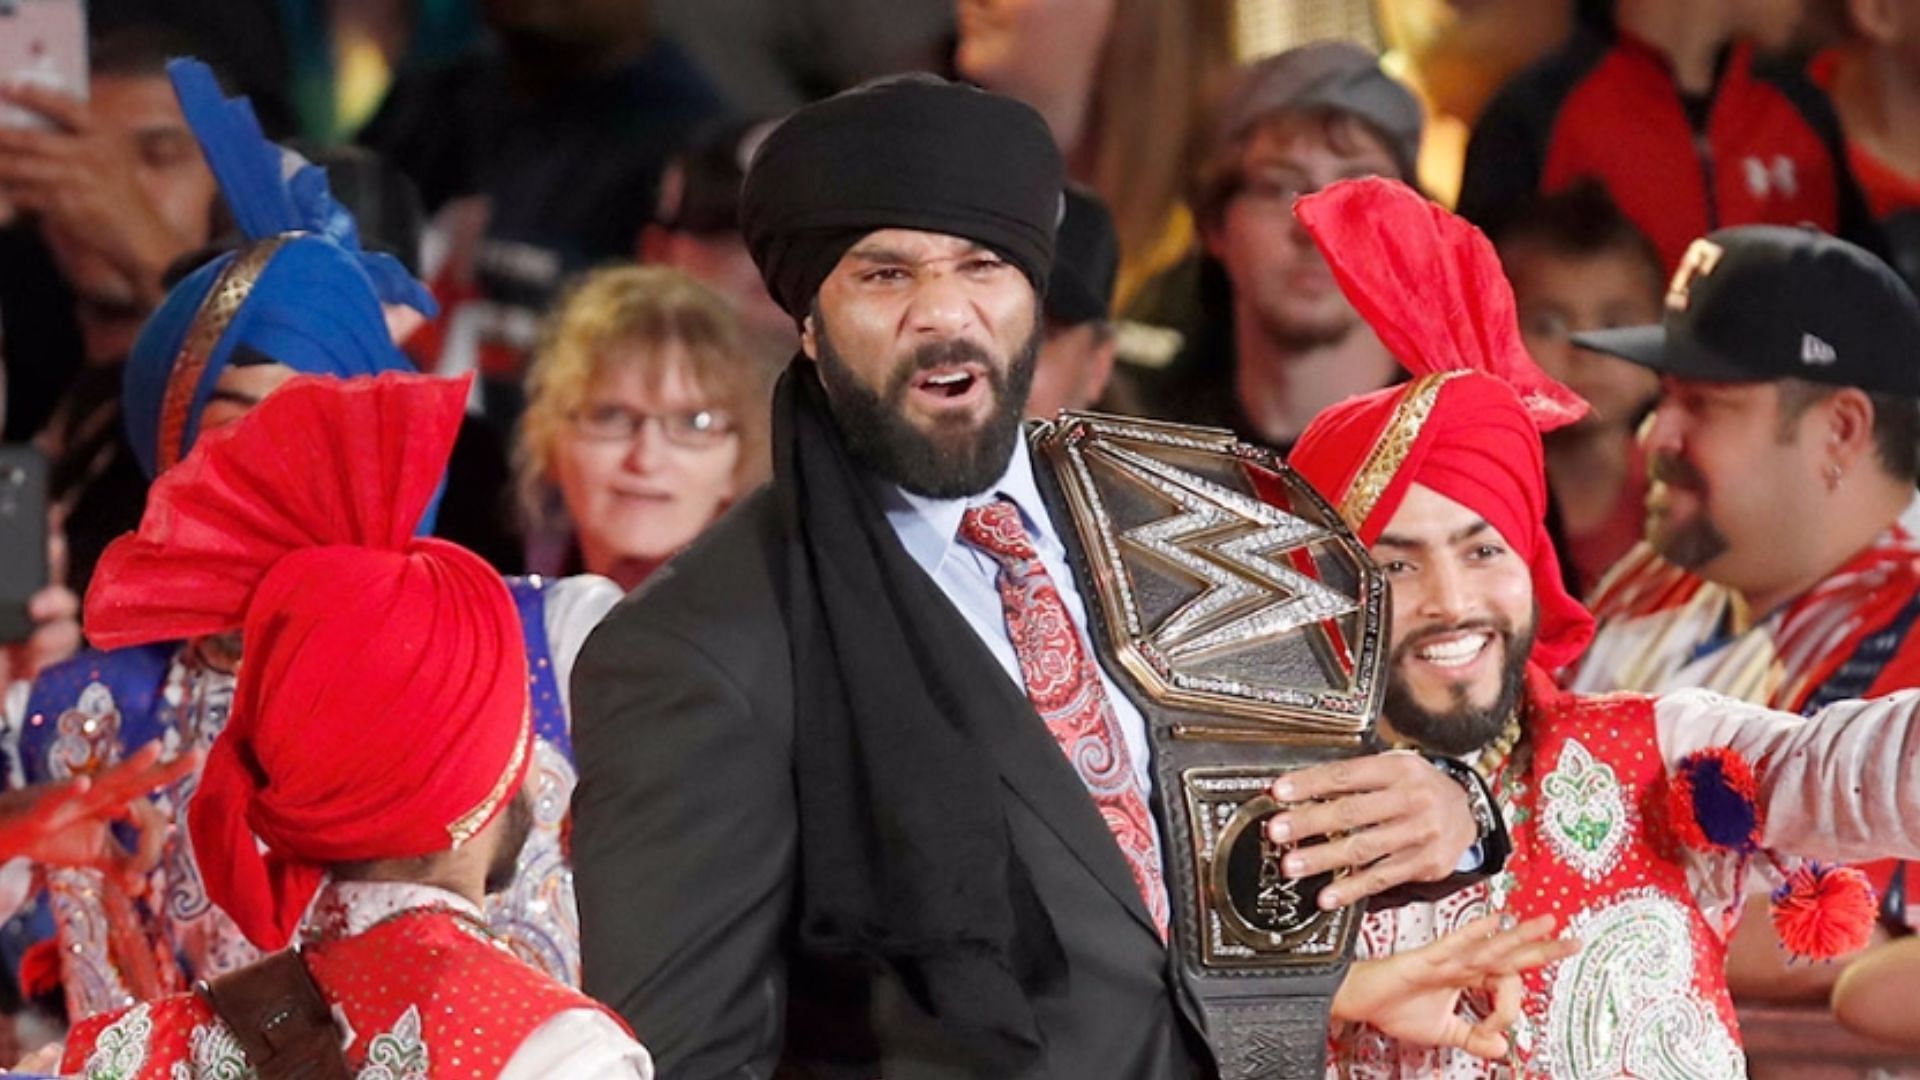 Jinder Mahal held the WWE Championship for 170 days